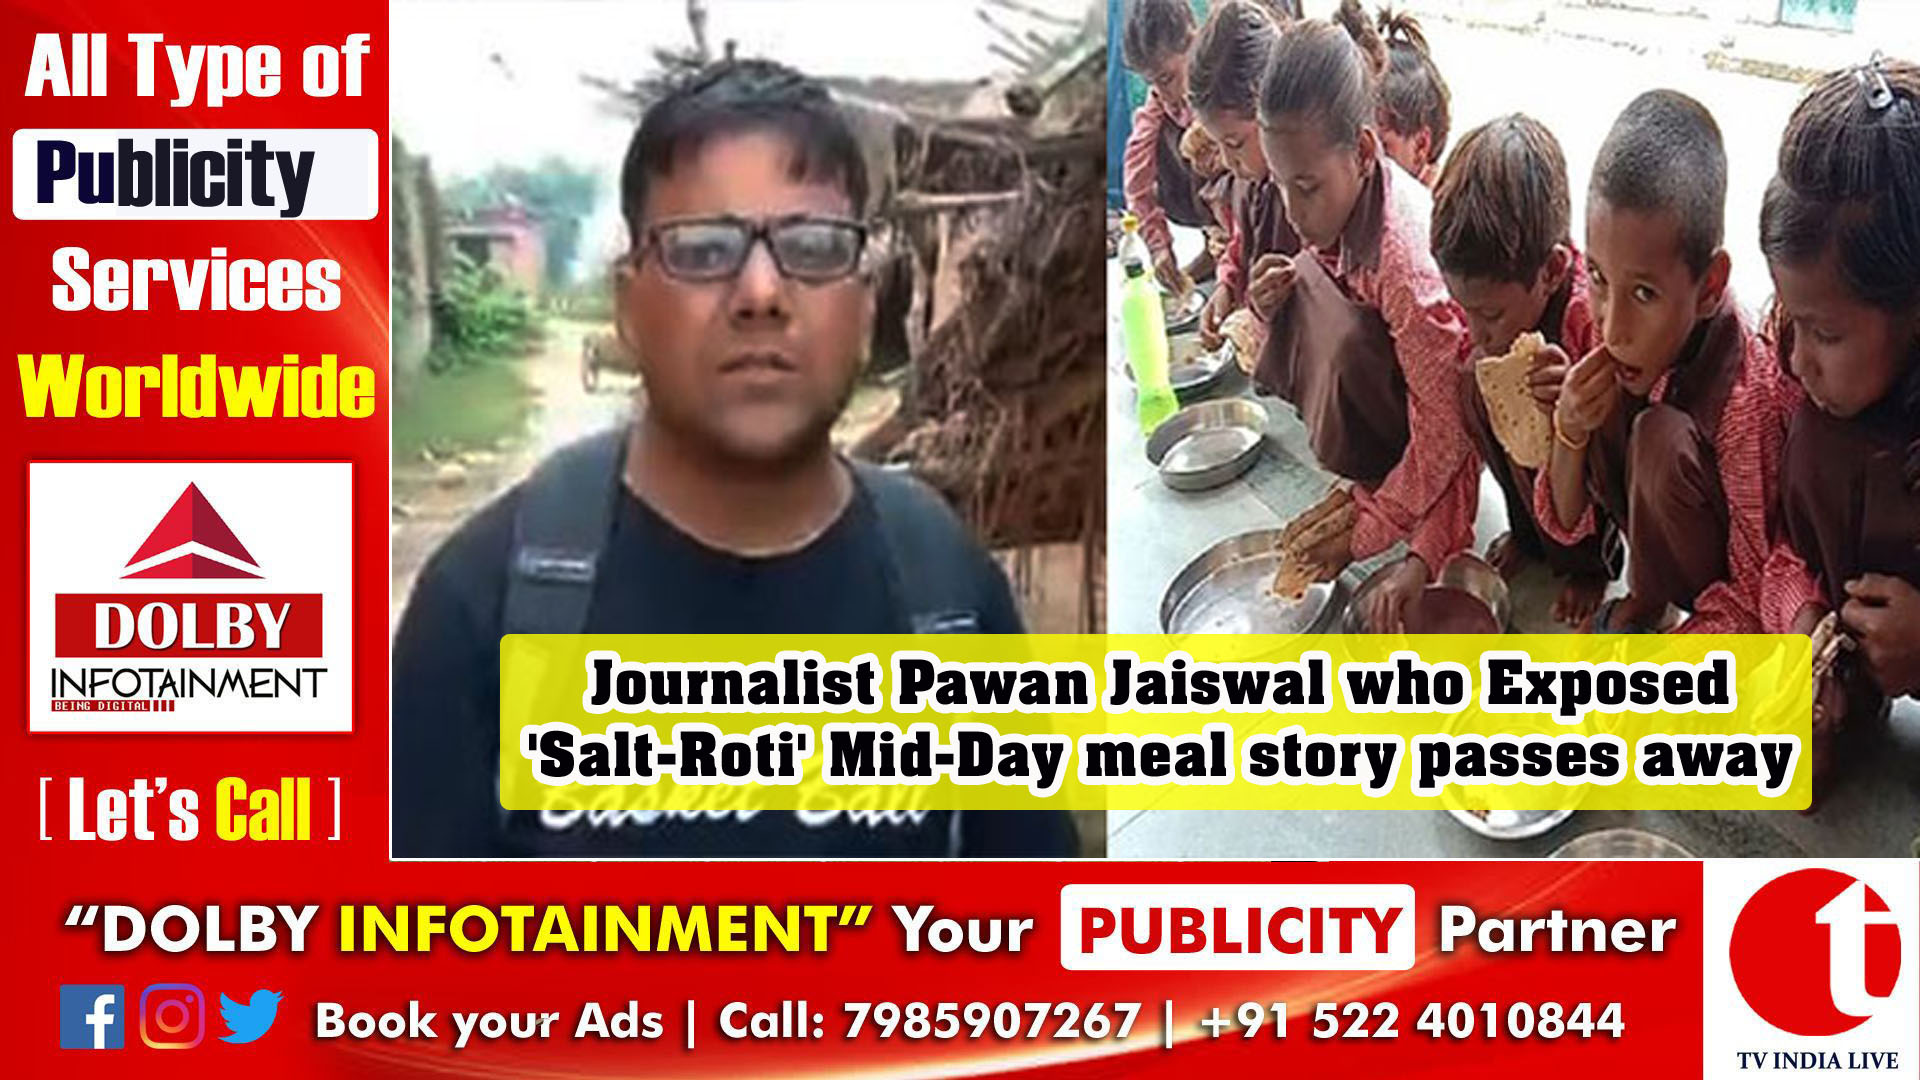 Journalist Pawan Jaiswal who Exposed 'Salt-Roti' Mid-Day meal story passes away